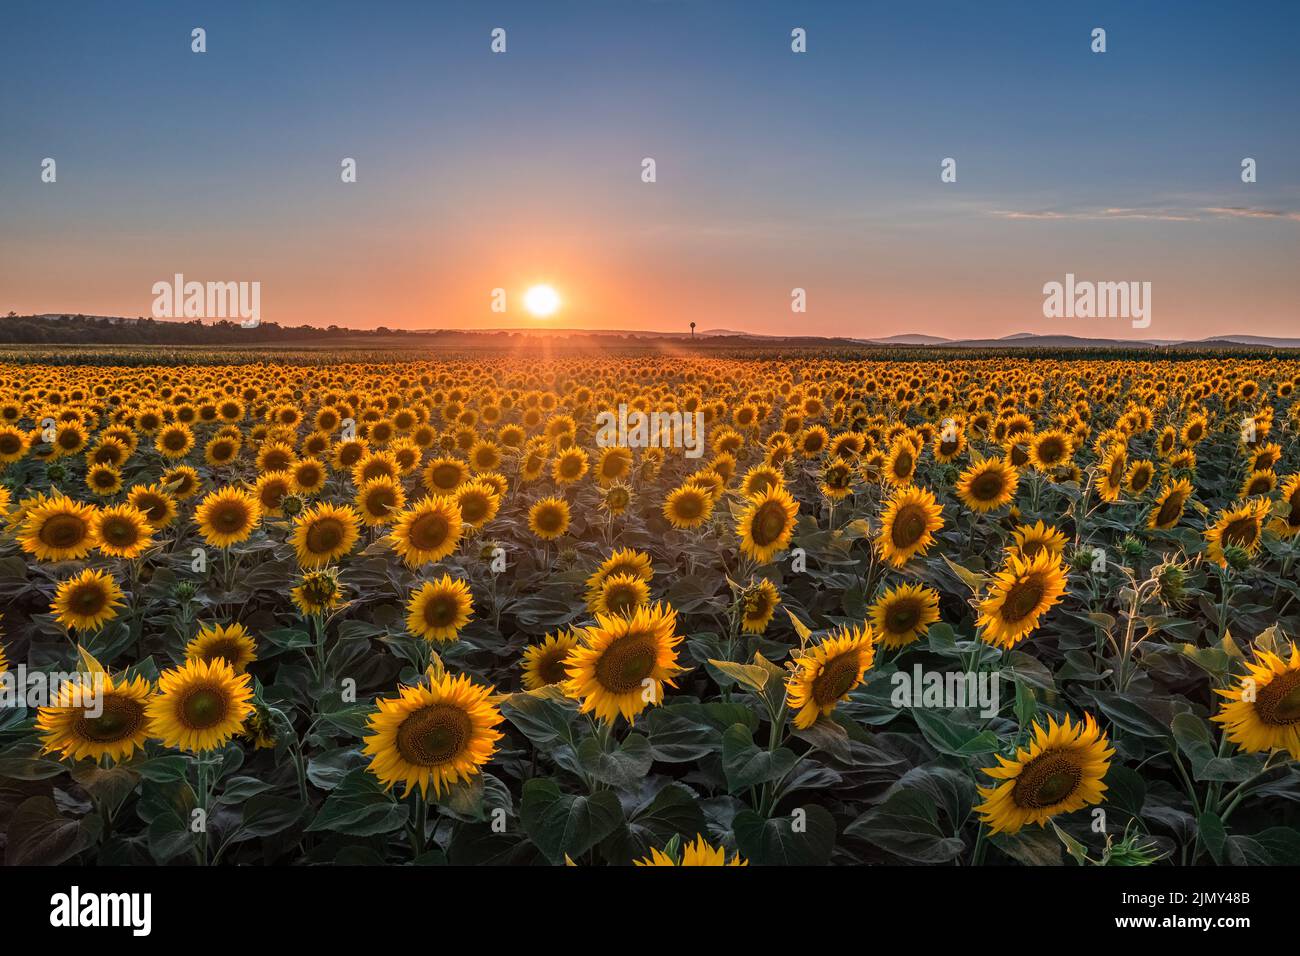 Balatonfuzfo, Hungary - Beautiful sunset over a sunflower field at summertime with clear blue sky near Lake Balaton. Agricultural background Stock Photo